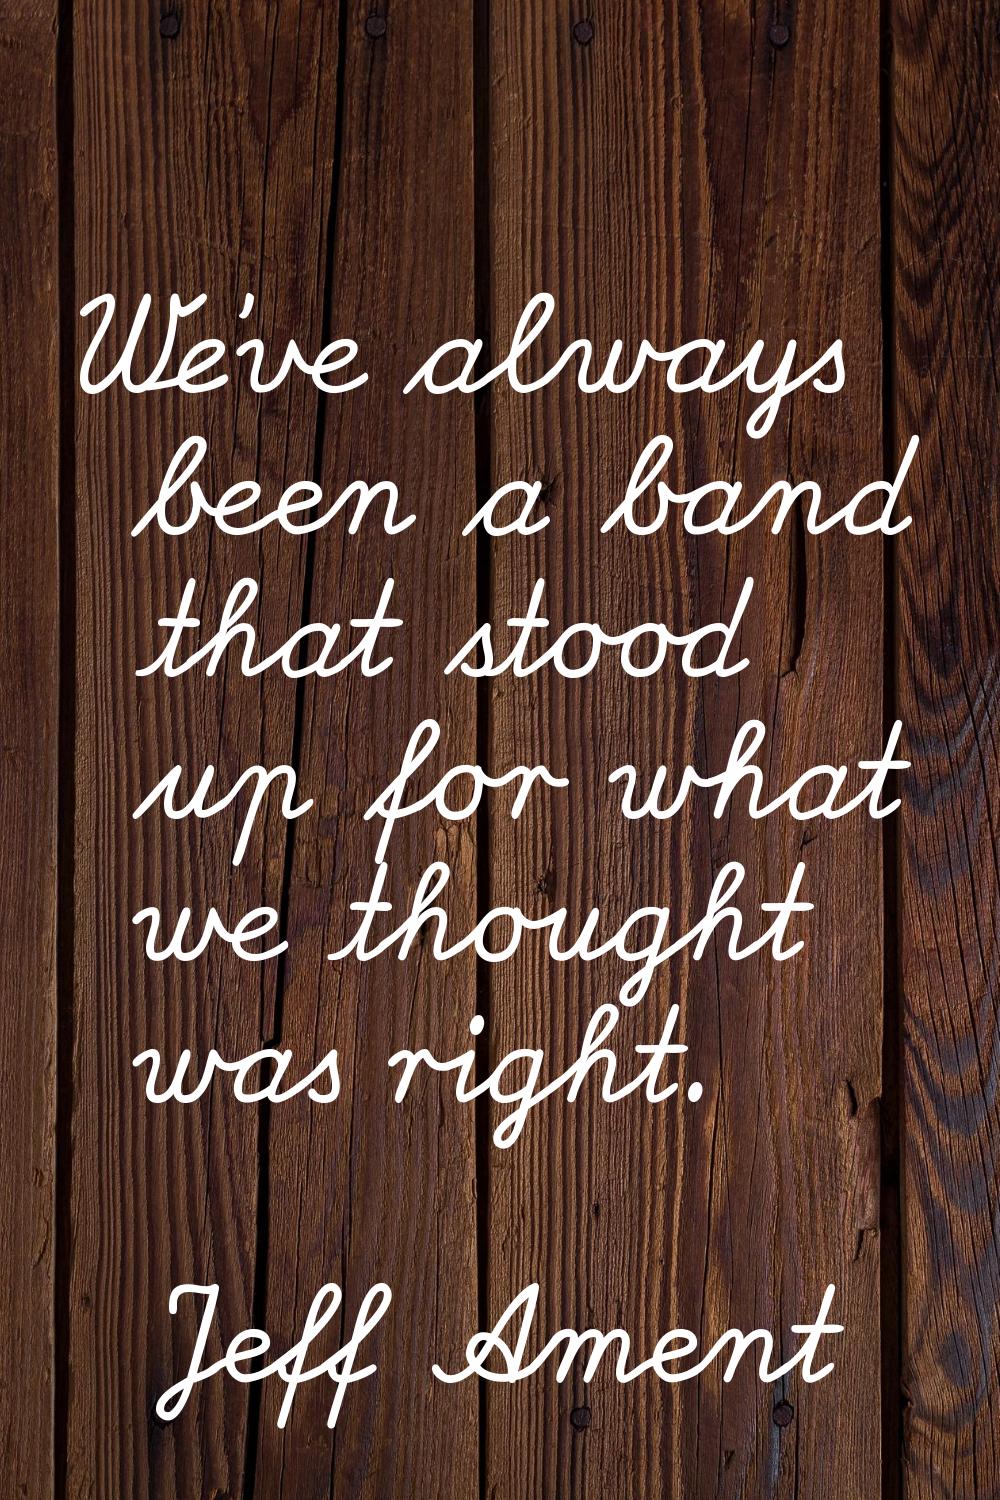 We've always been a band that stood up for what we thought was right.